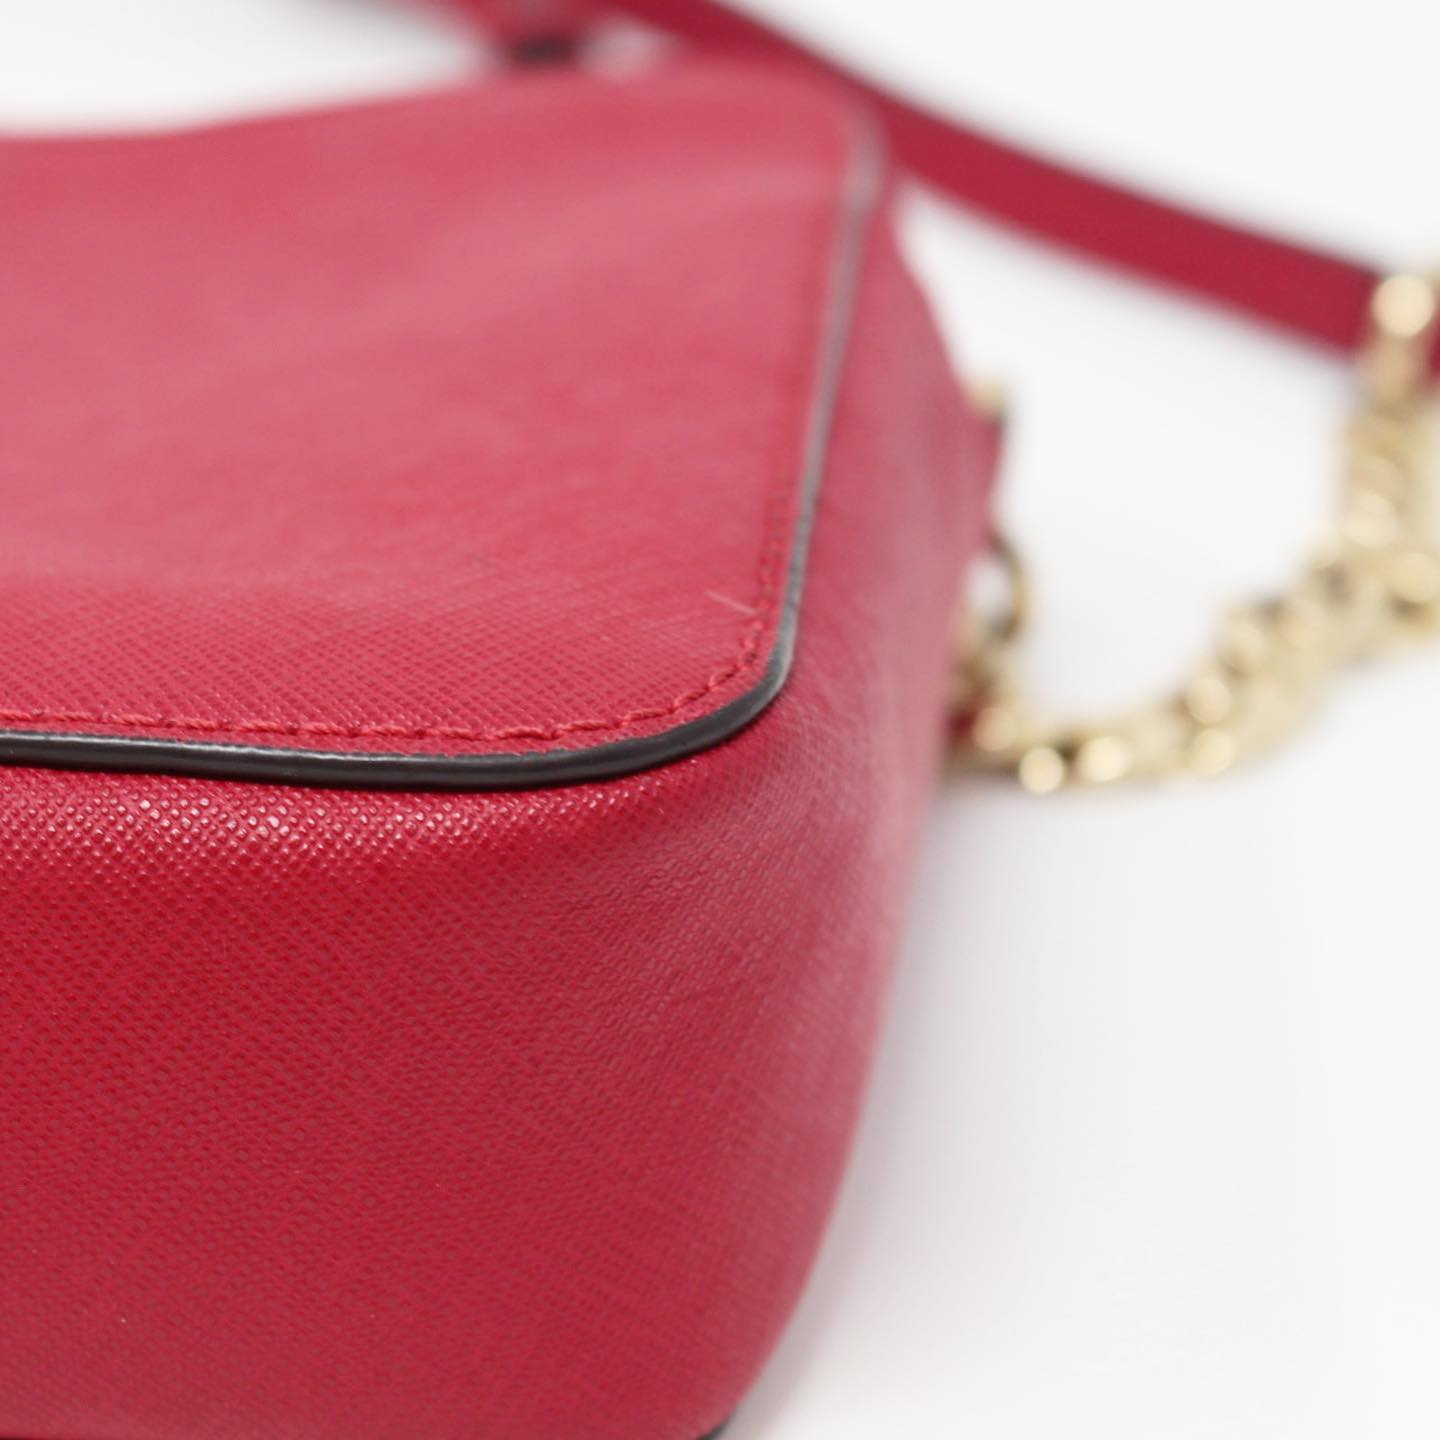 Leather crossbody bag Michael Kors Red in Leather - 29840987